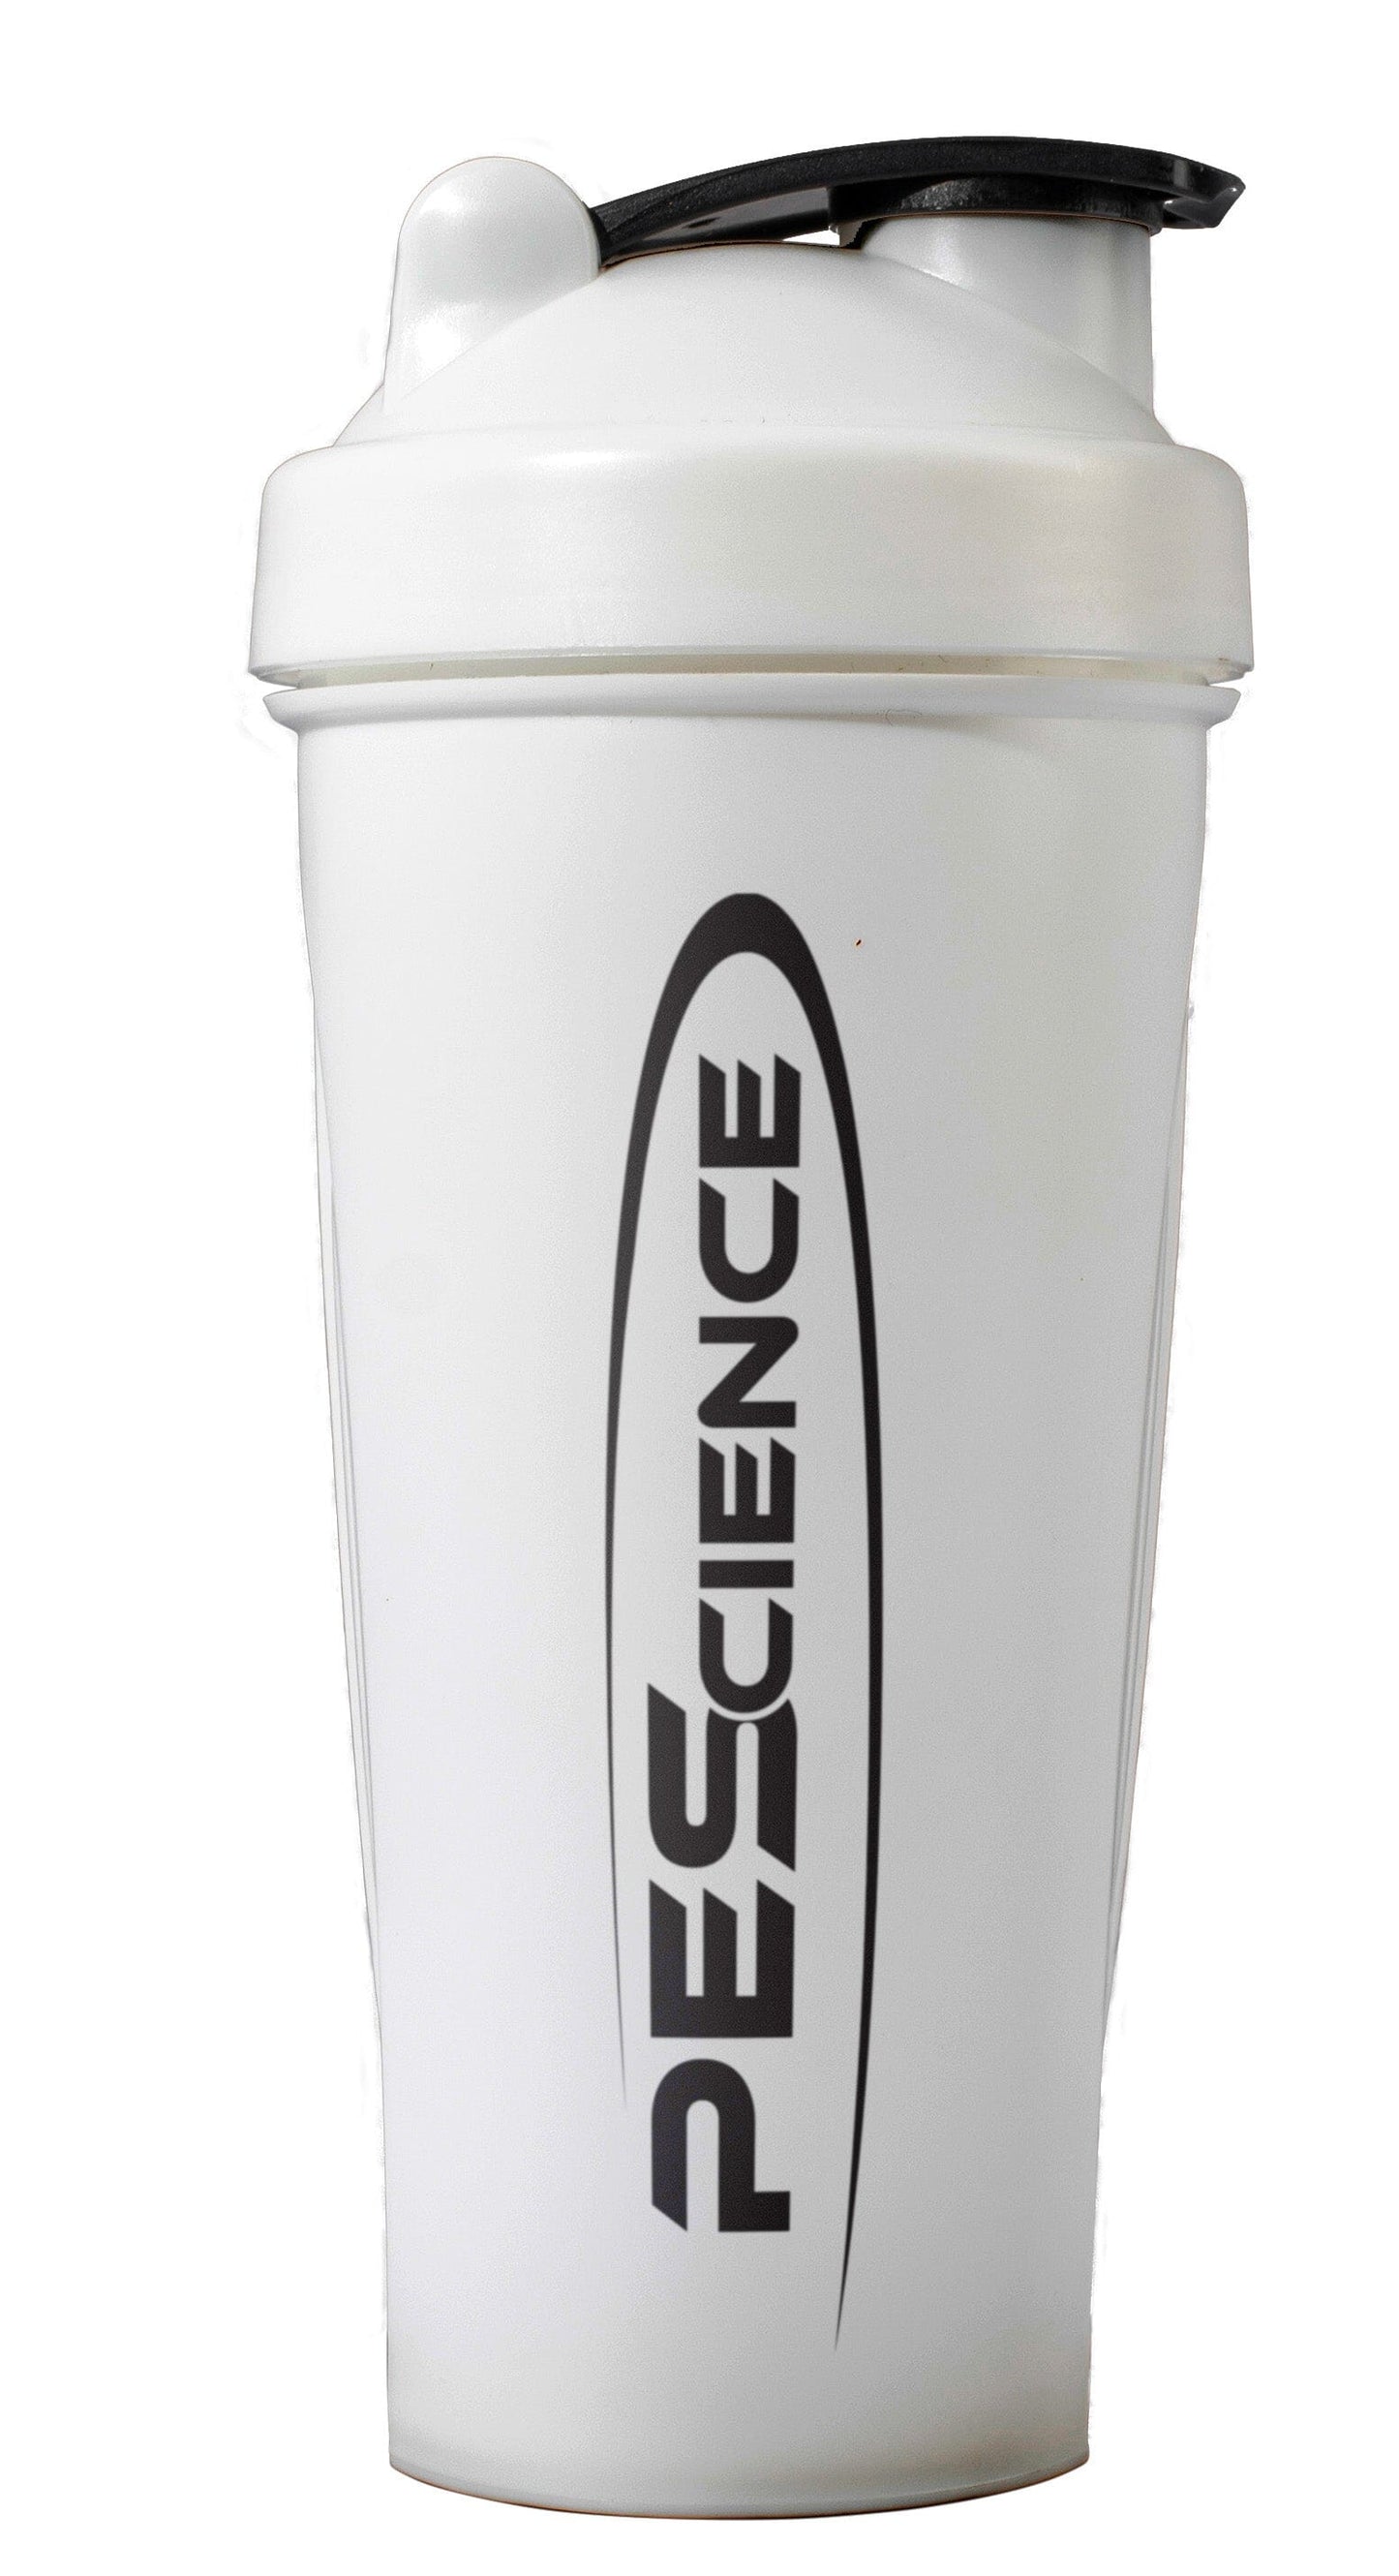 Shaker Cup Accessory PEScience 